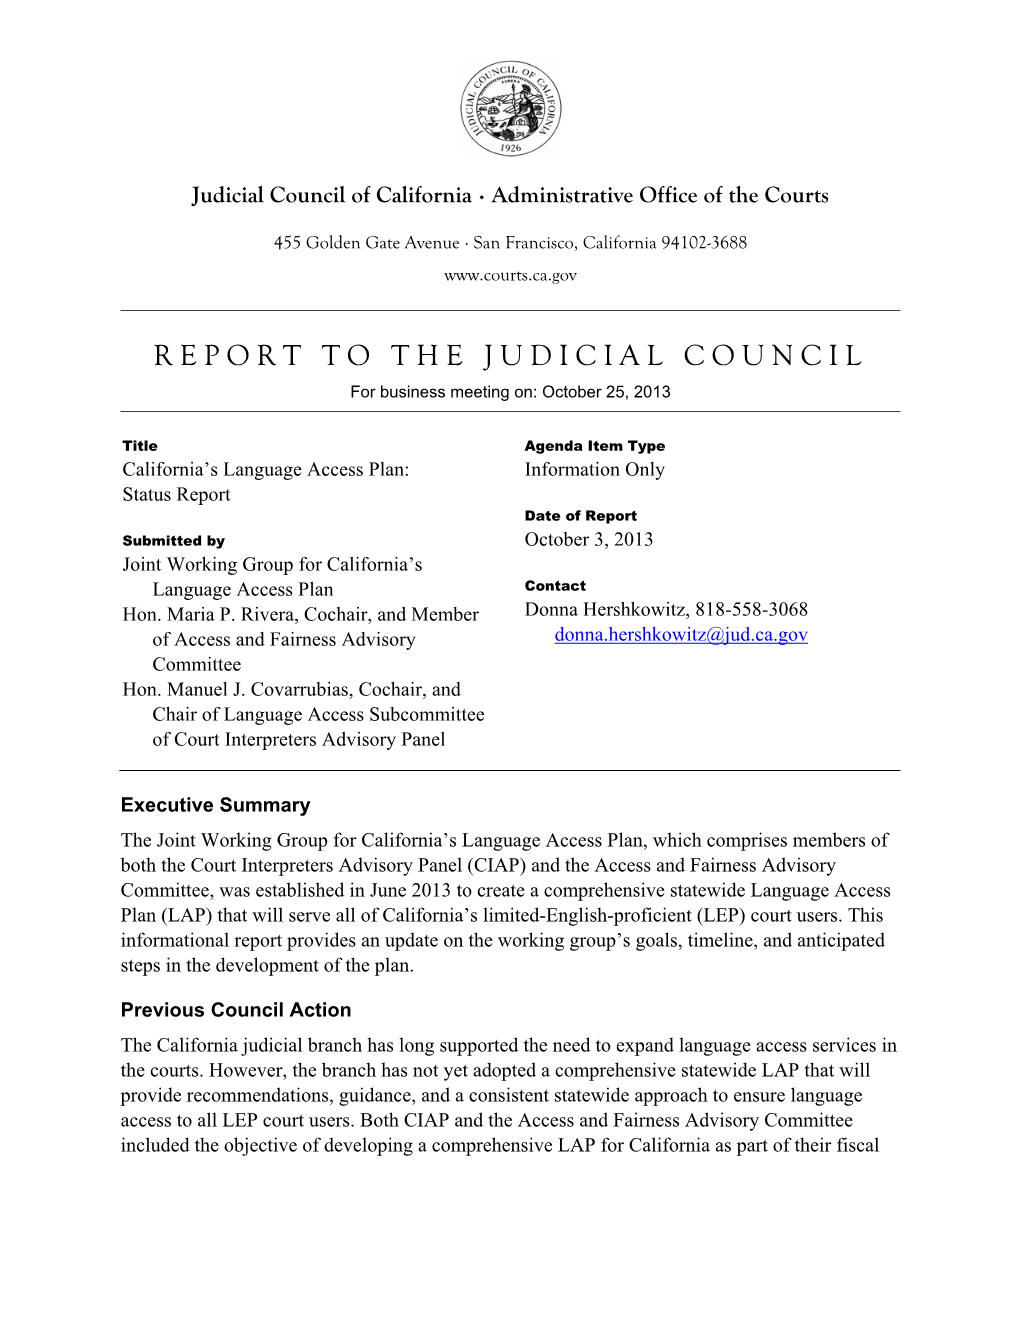 REPORT to the JUDICIAL COUNCIL for Business Meeting On: October 25, 2013